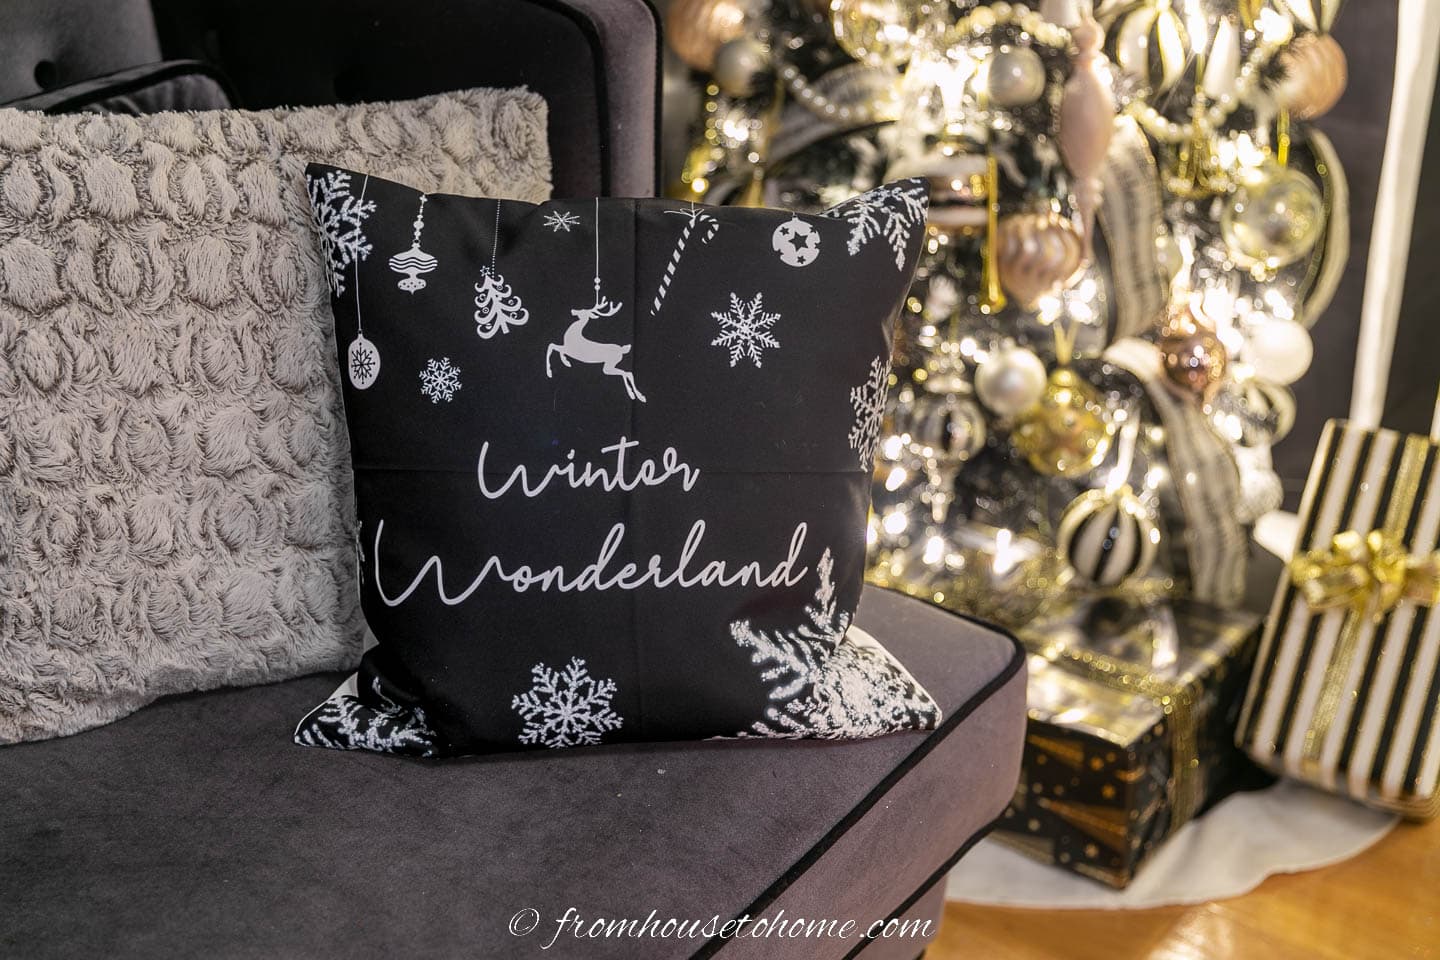 Black "Winter Wonderland" cushion on a sofa in front of a Christmas tree